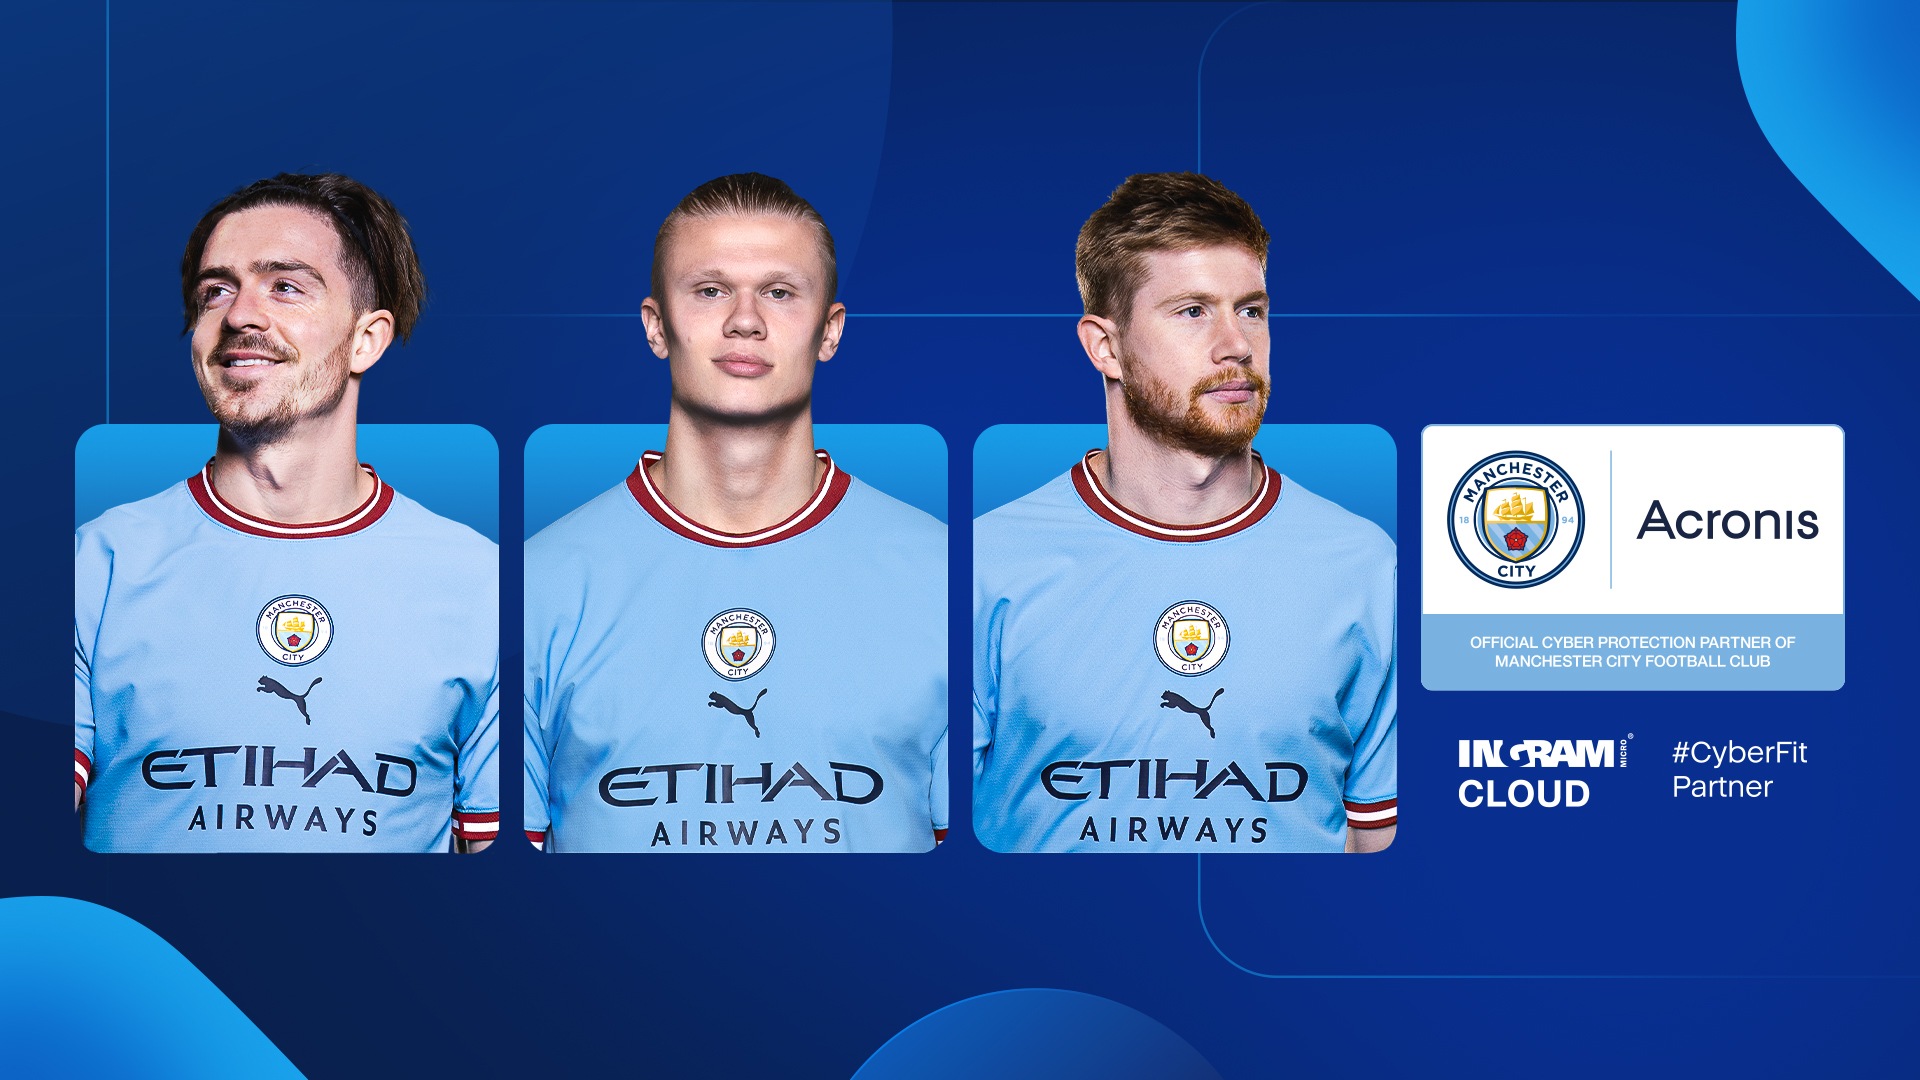 Man City replenishes cyber warfare defenses with Acronis renewal